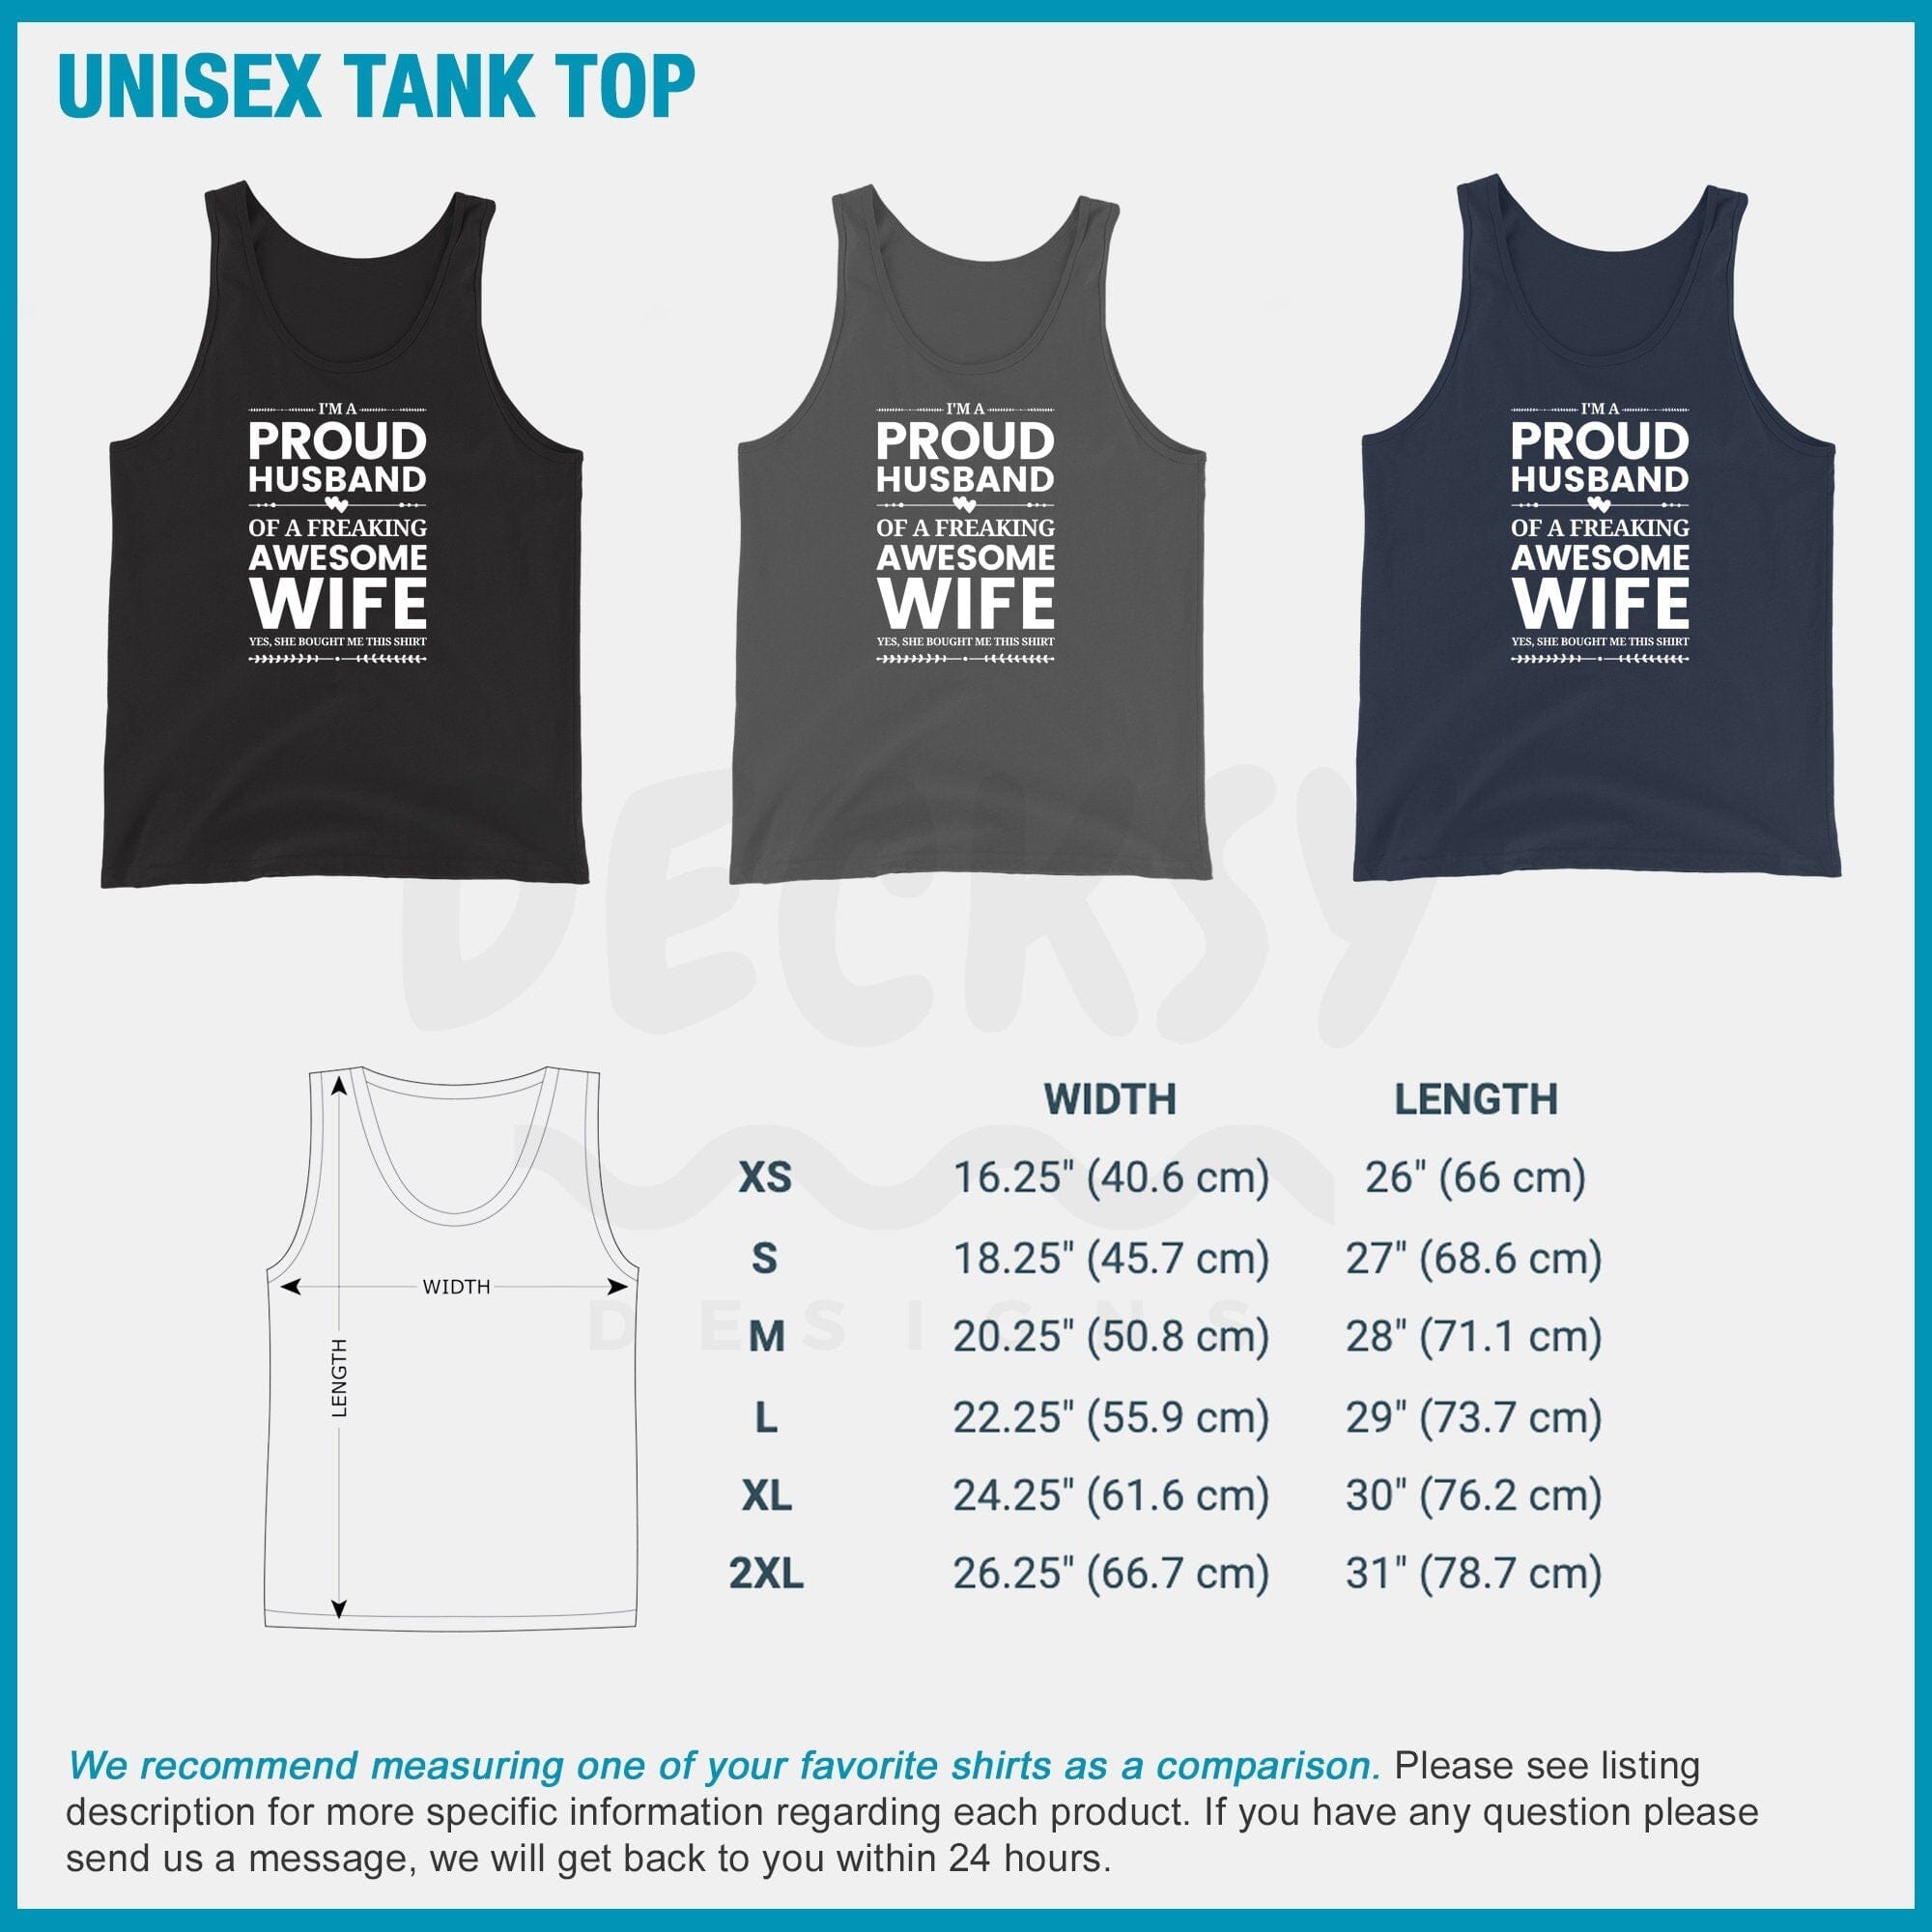 Funny Shirt for Husband, Anniversary Gift From Wife-Clothing:Gender-Neutral Adult Clothing:Tops & Tees:T-shirts:Graphic Tees-DecksyDesigns